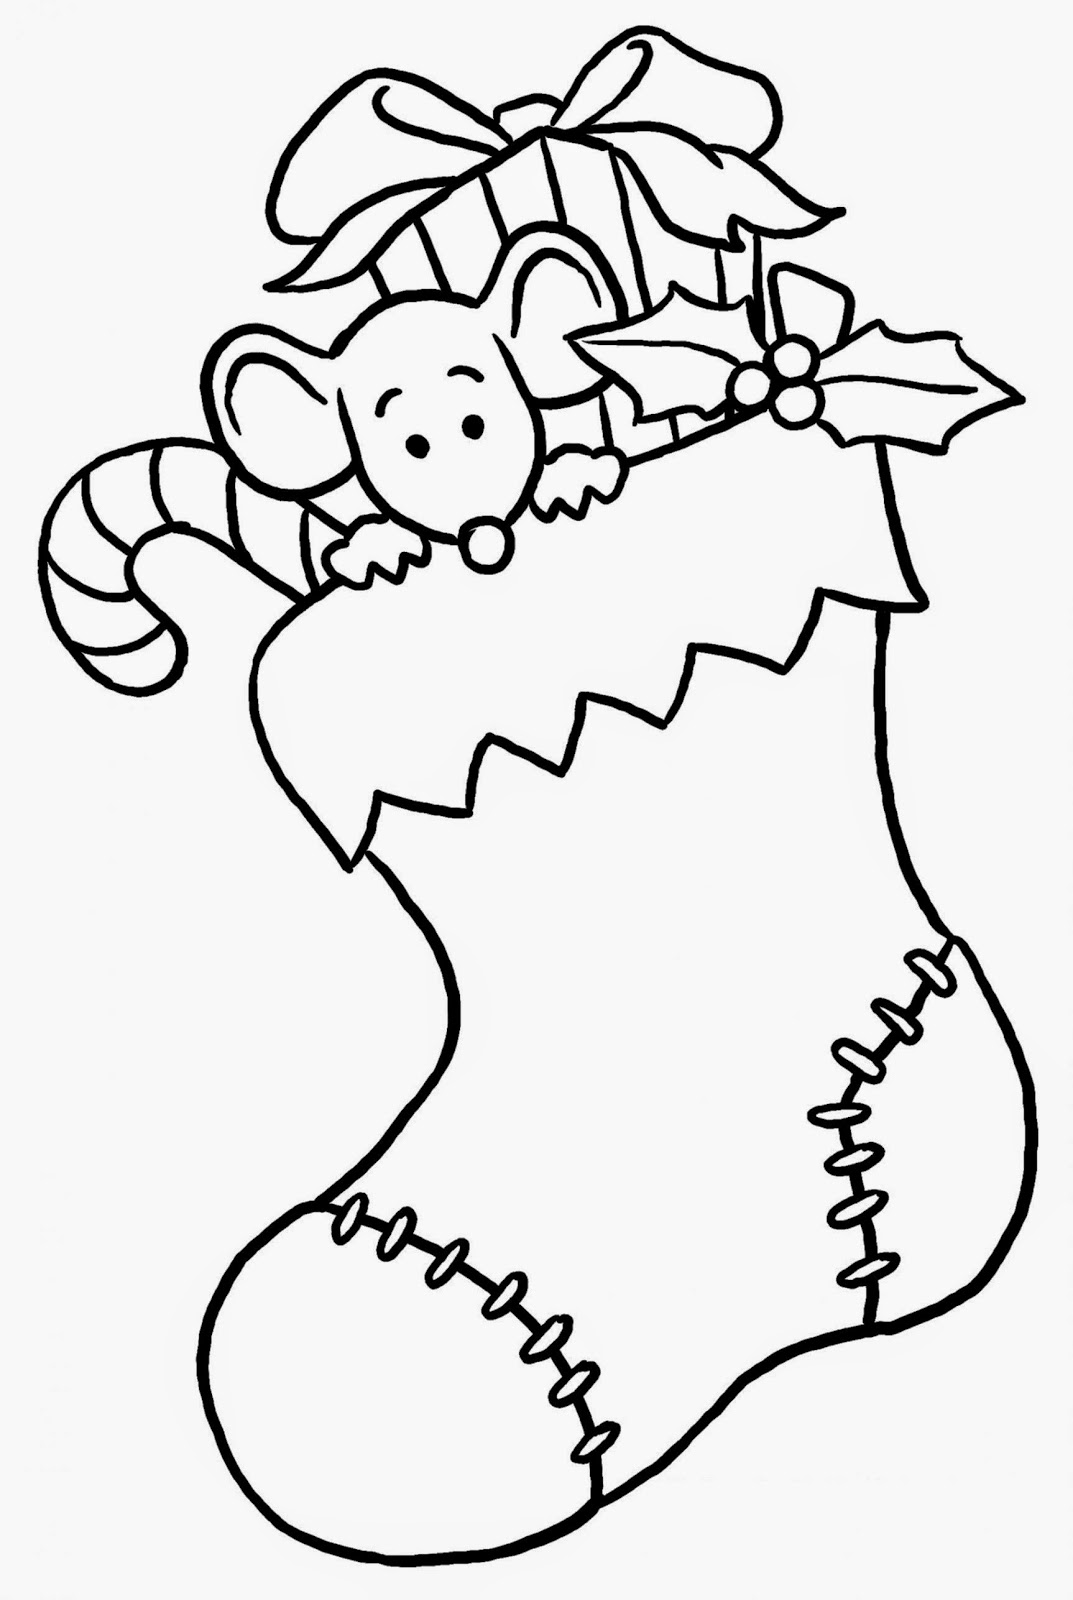 Free Printable Preschool Coloring Pages   Best Coloring Pages For Kids